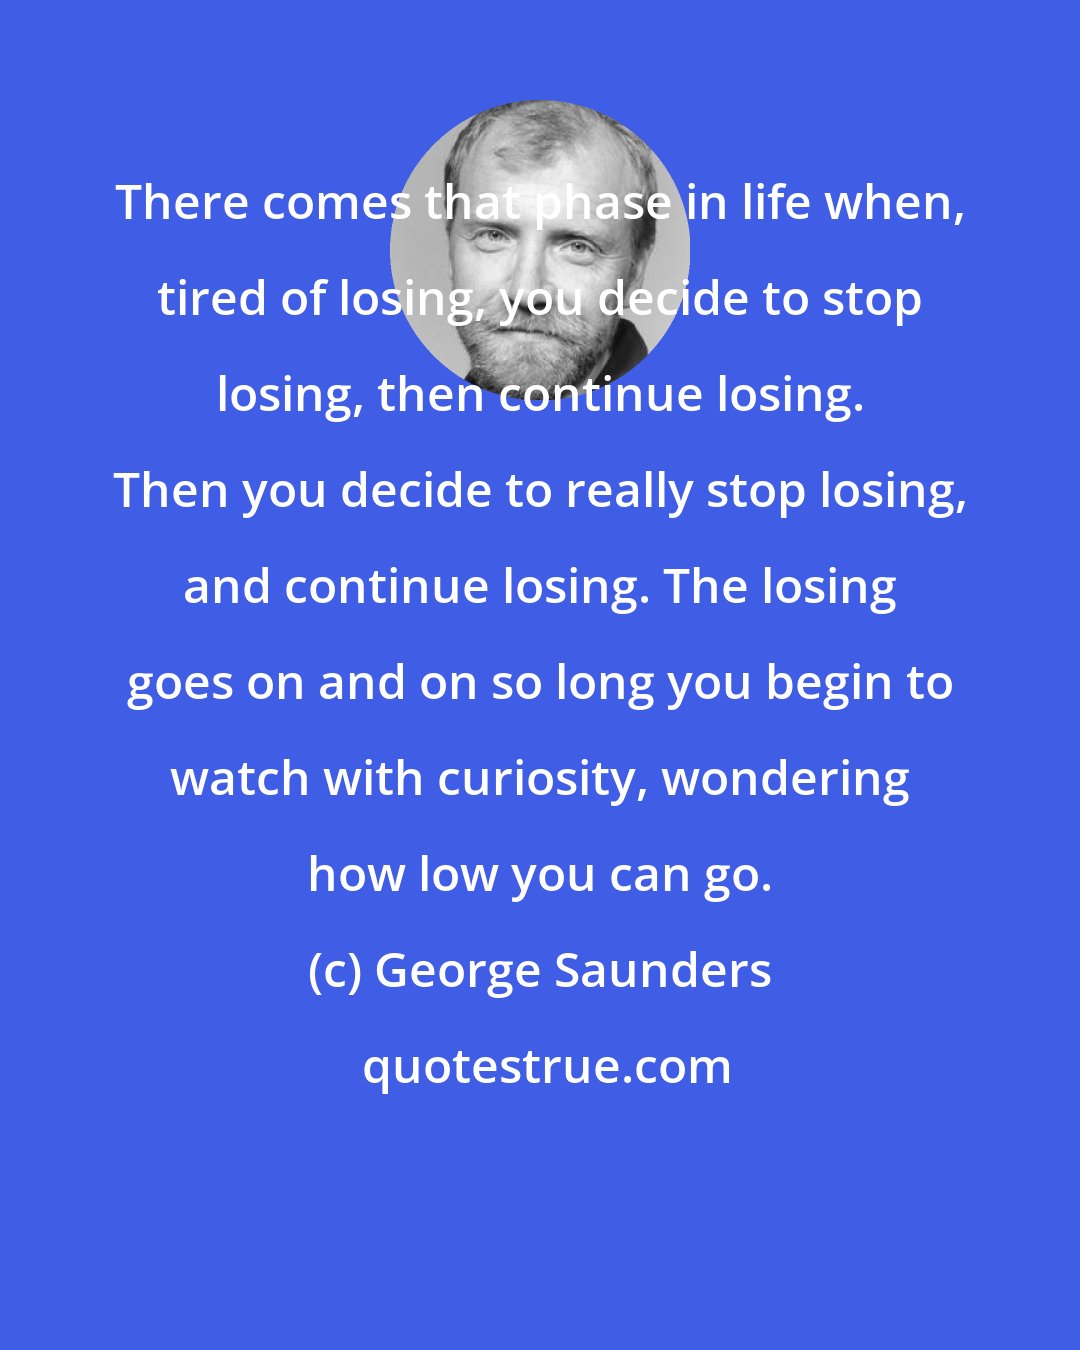 George Saunders: There comes that phase in life when, tired of losing, you decide to stop losing, then continue losing. Then you decide to really stop losing, and continue losing. The losing goes on and on so long you begin to watch with curiosity, wondering how low you can go.